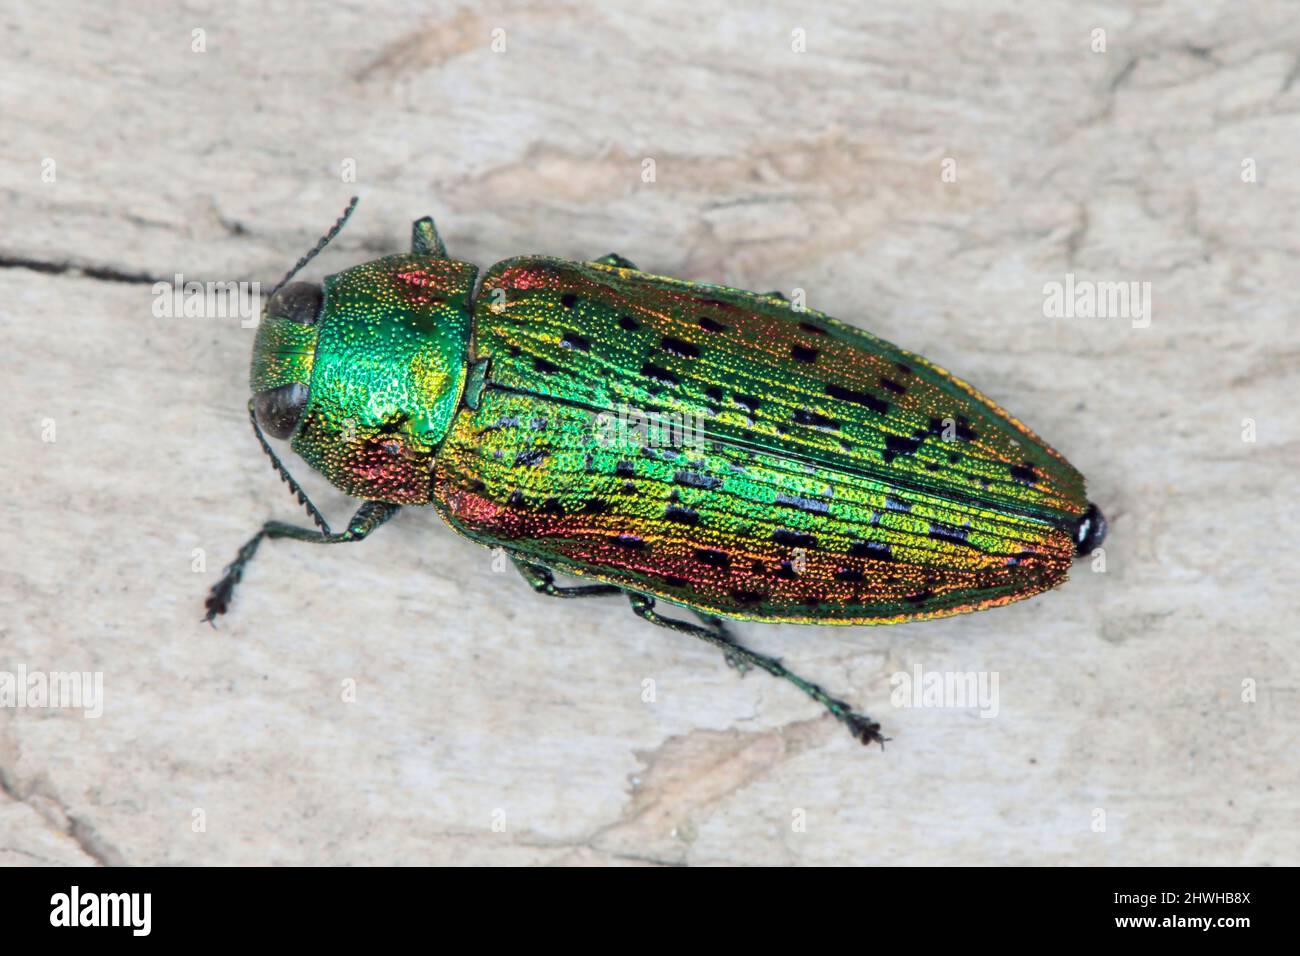 Elm tree jewel beetle Lamprodila decipiens. A colorful insect species occurring in Europe in its natural environment. Stock Photo